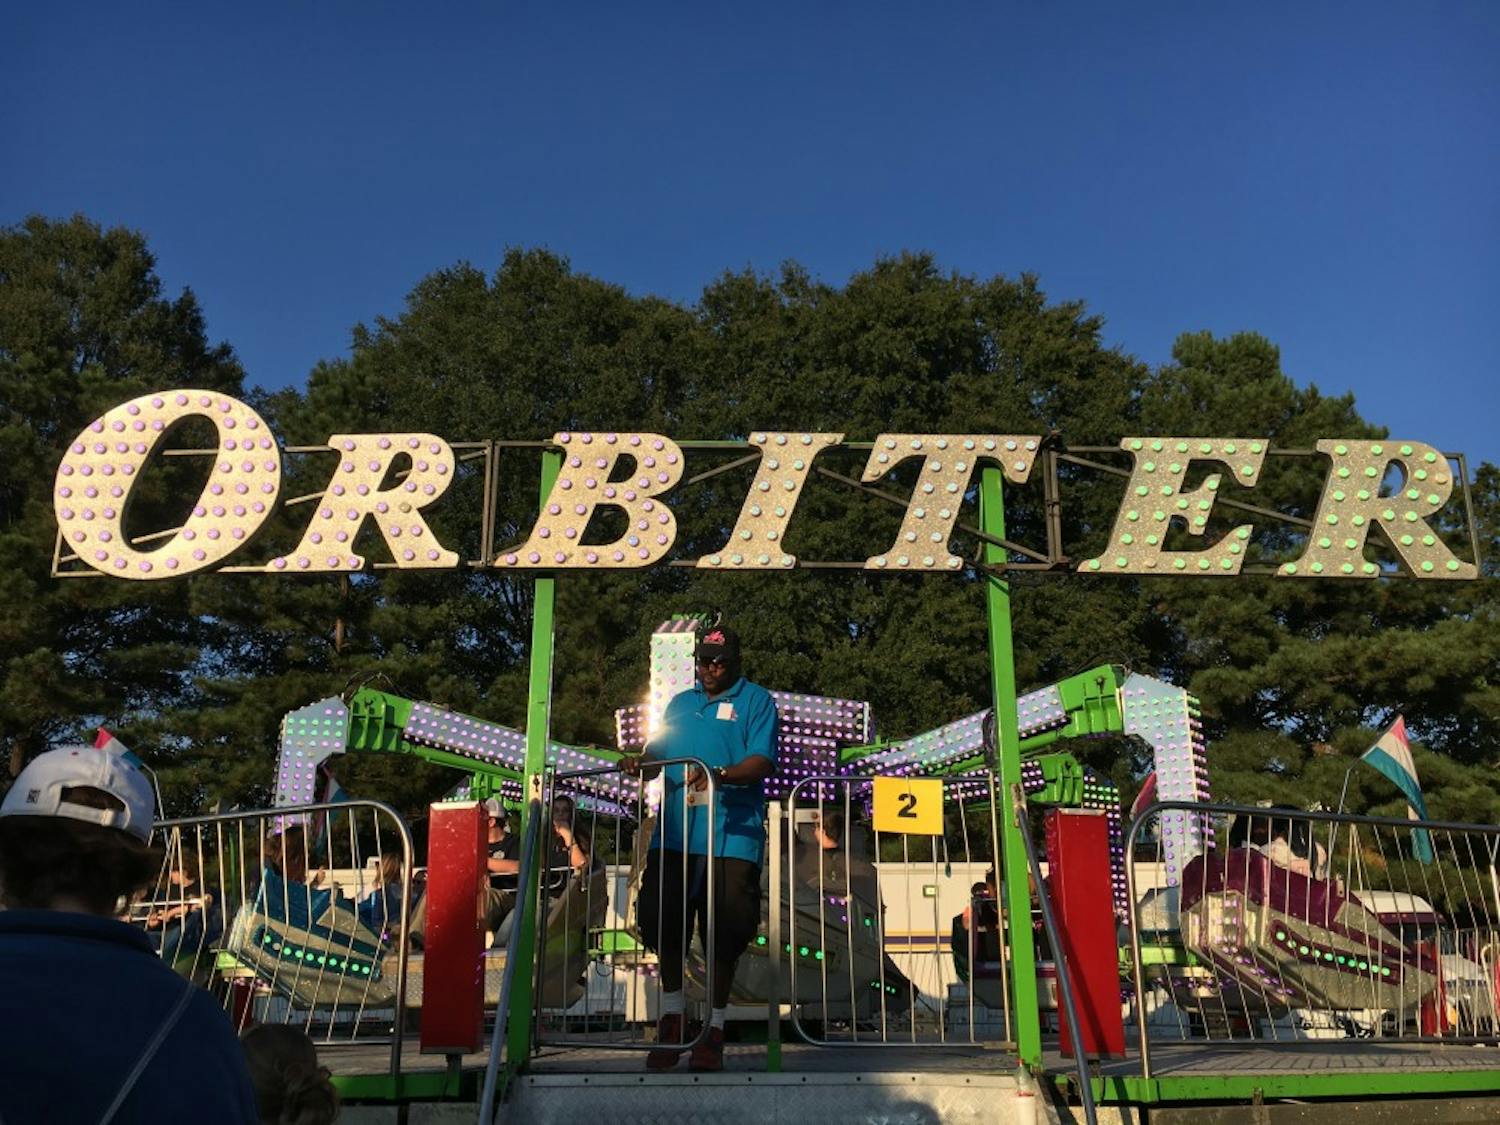 The Orbiter ride is one of many attractions at the NC State Fair.